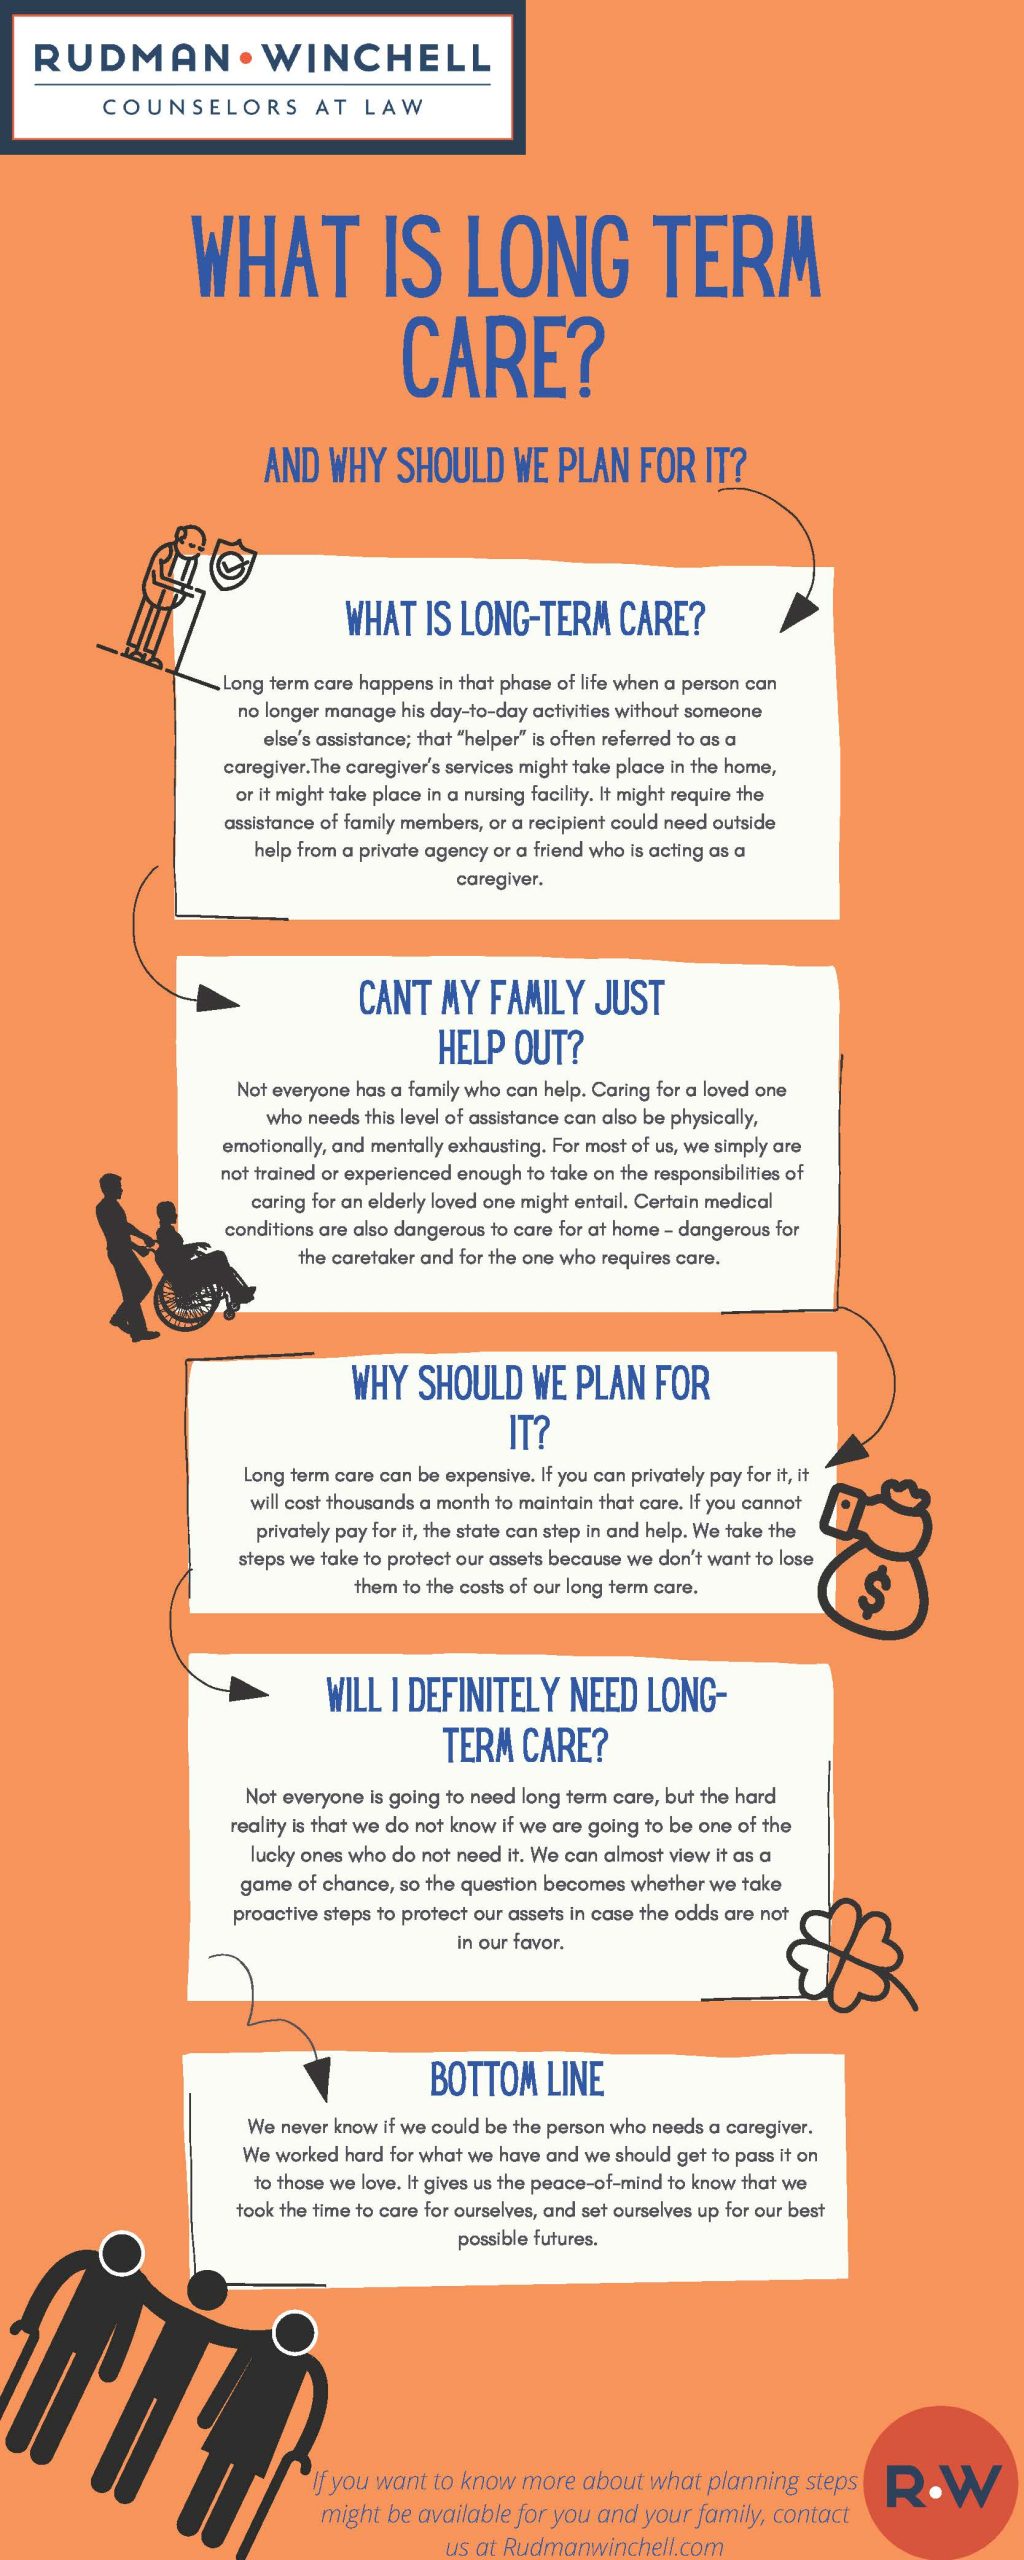 What is Long Term Care?